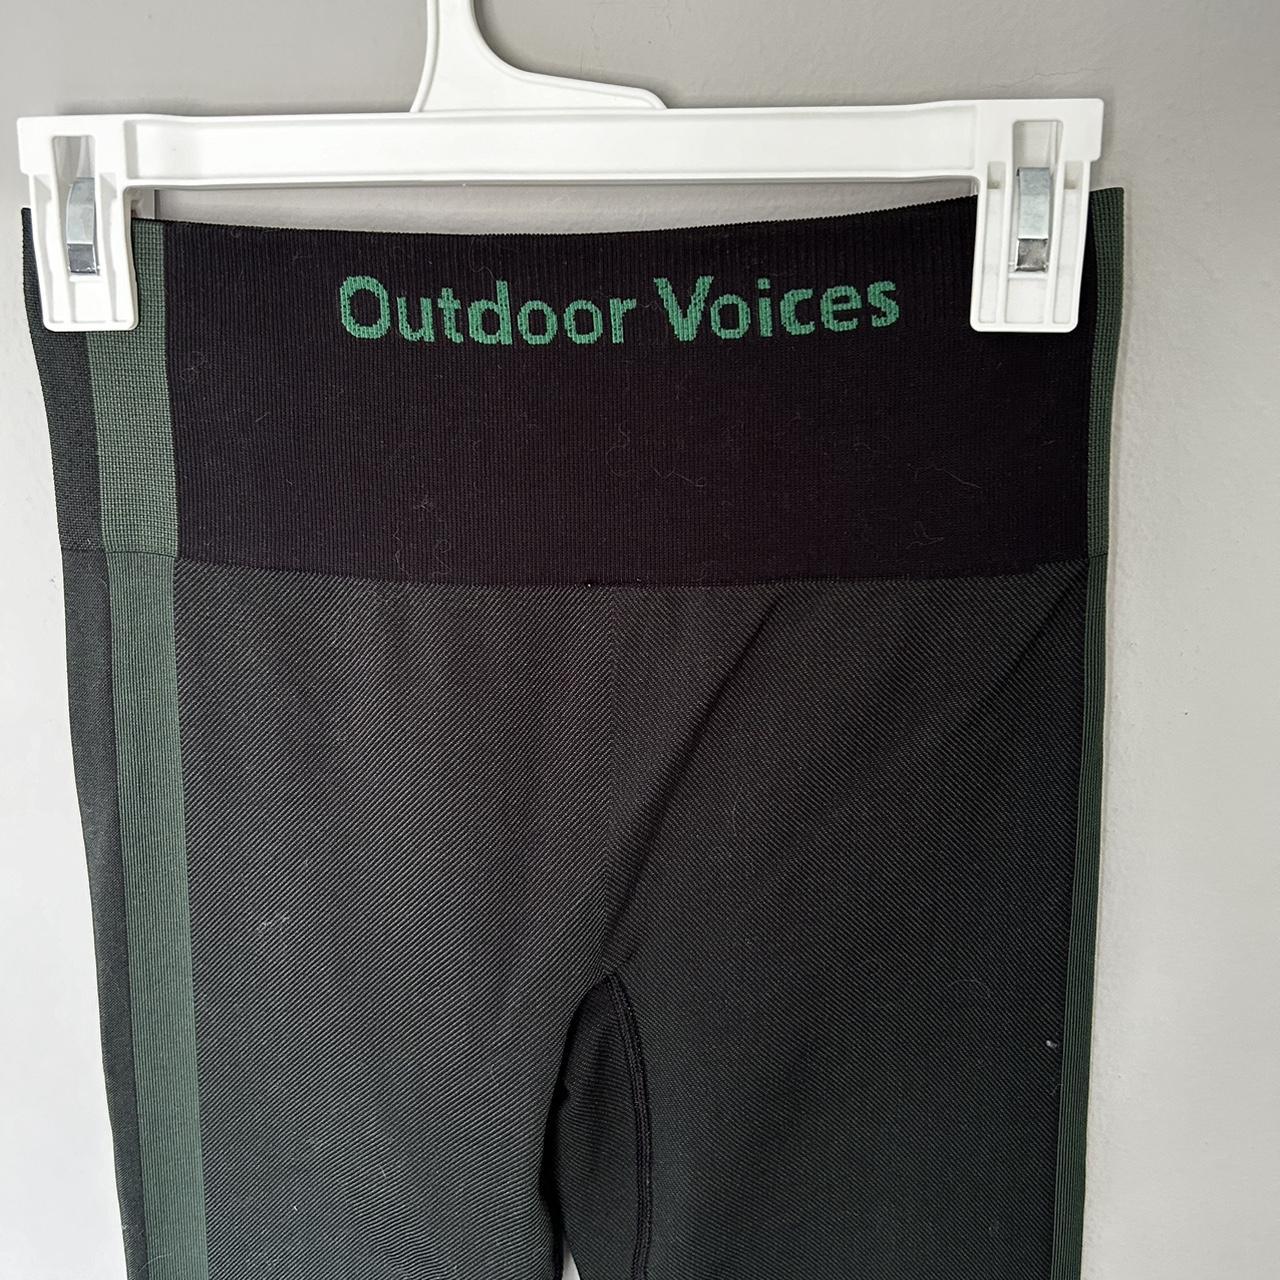 Outdoor voices SeamlessSmooth 7/8 Legging in